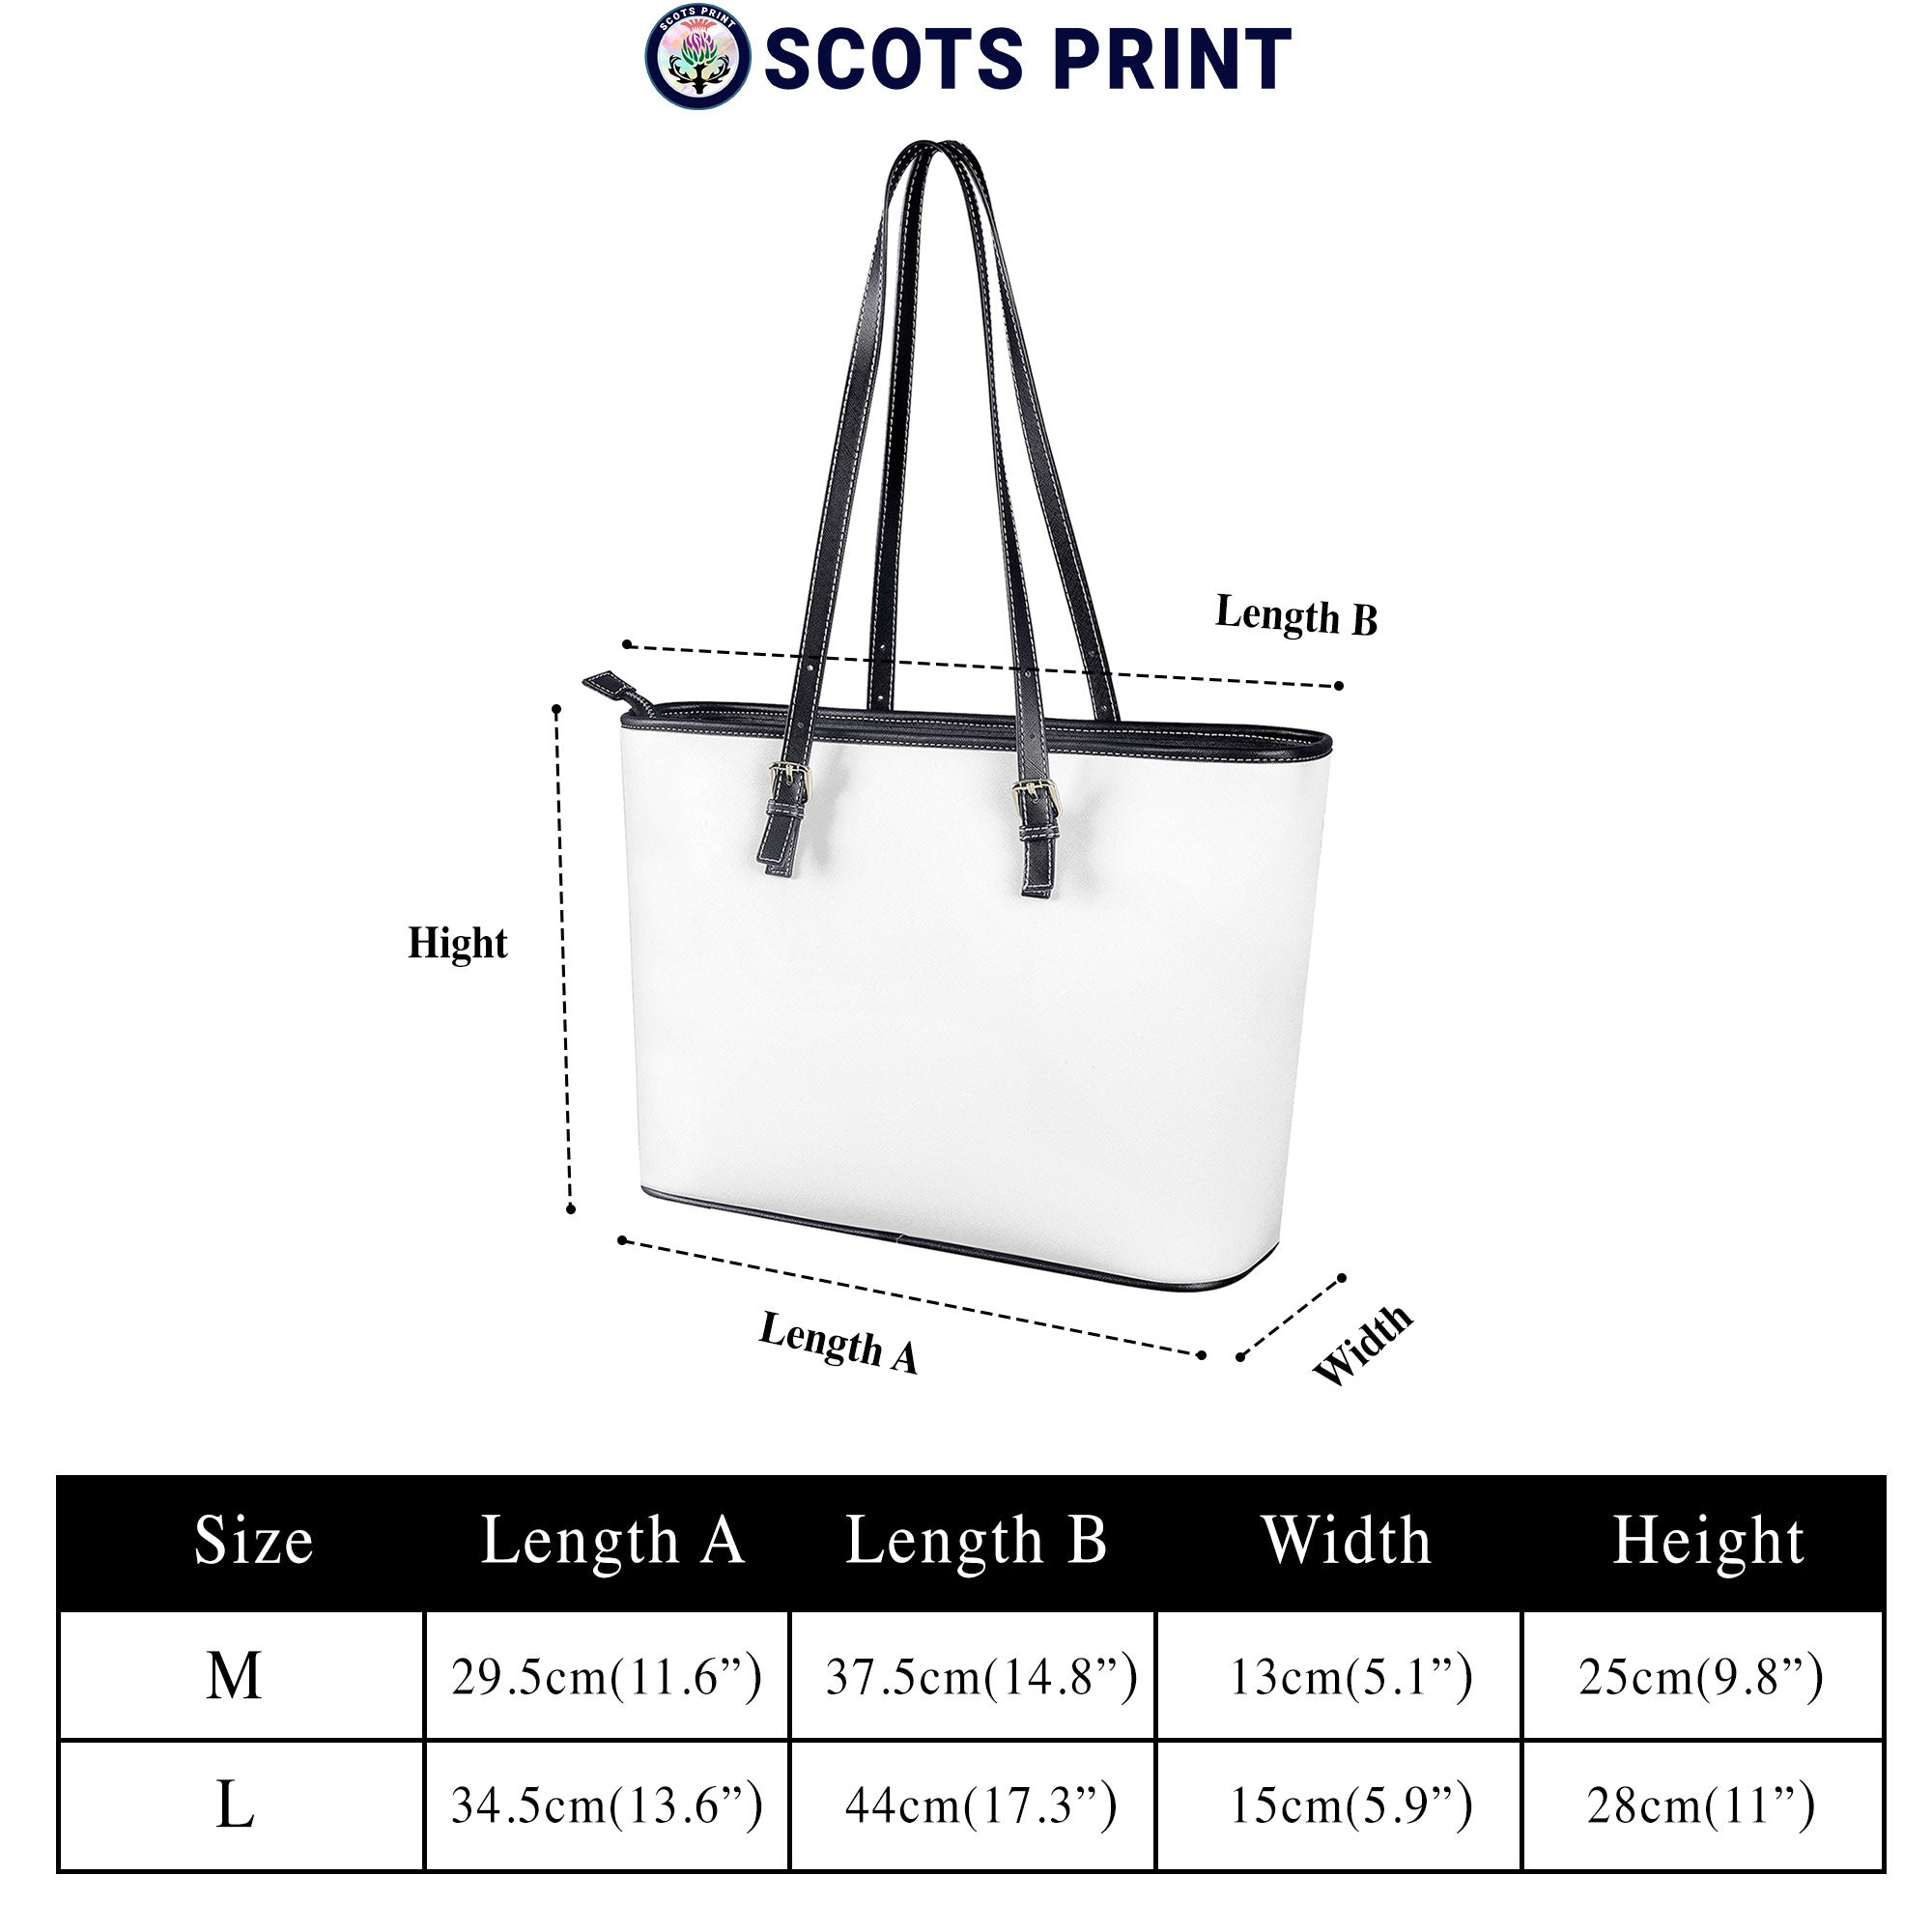 Paisley District Tartan Crest Leather Tote Bag